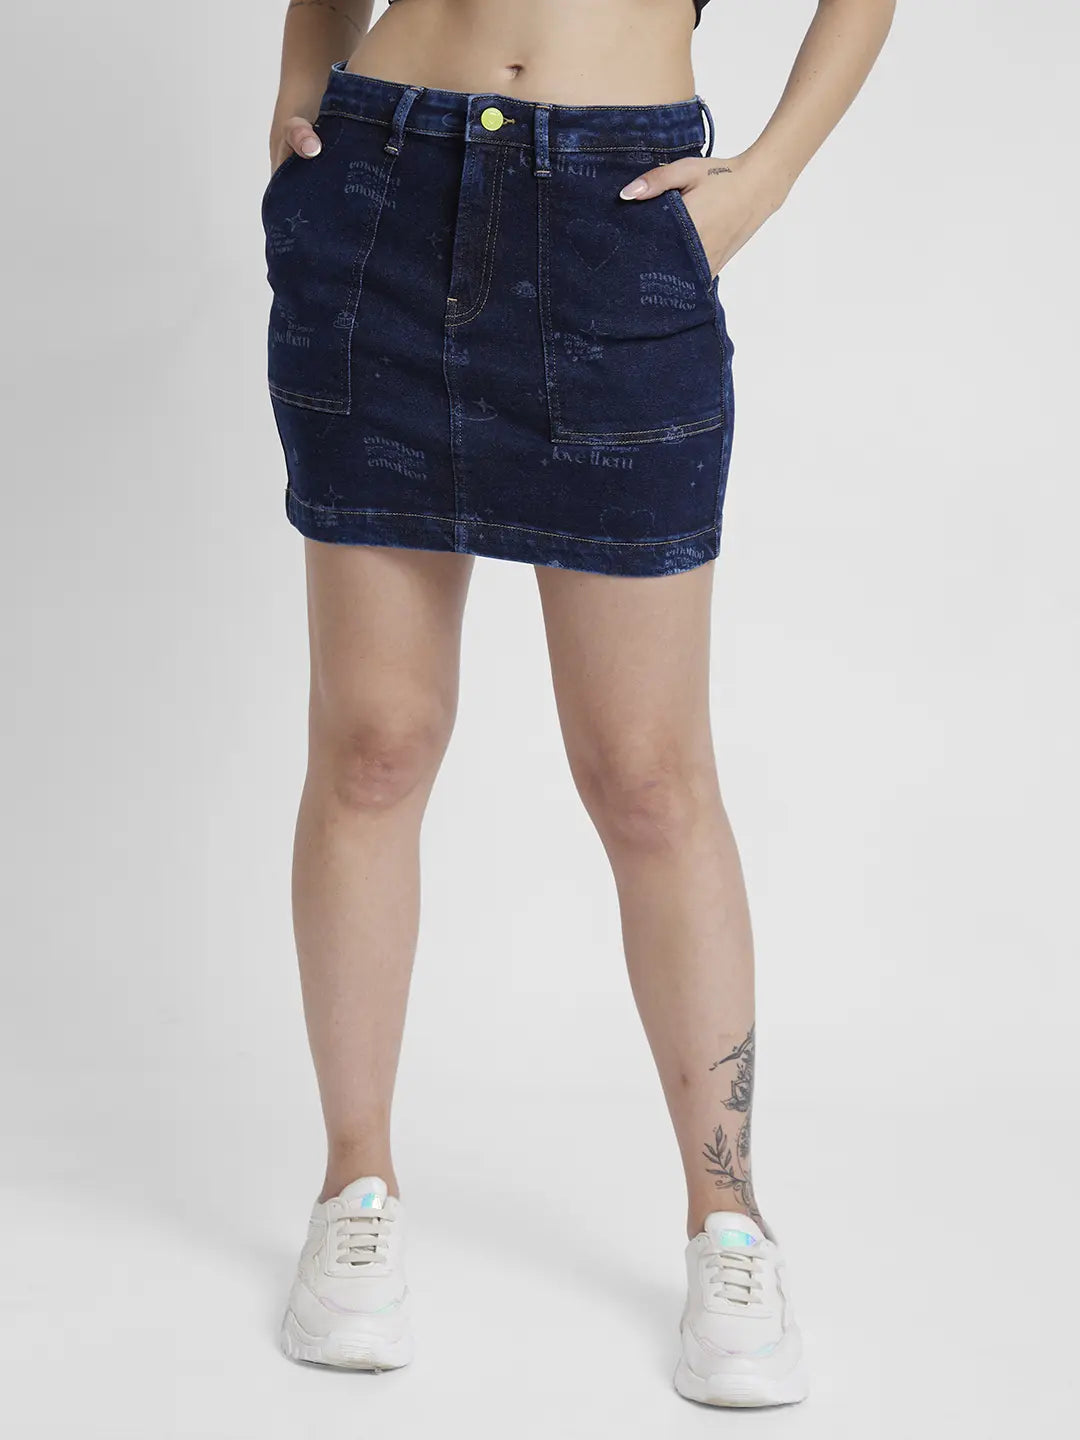 Buy luvamia Jean Skirt for Women with Slit High Wasited Bodycon Stretch  Pencil Mini Short Denim Skirts, Classic Blue, Large at Amazon.in